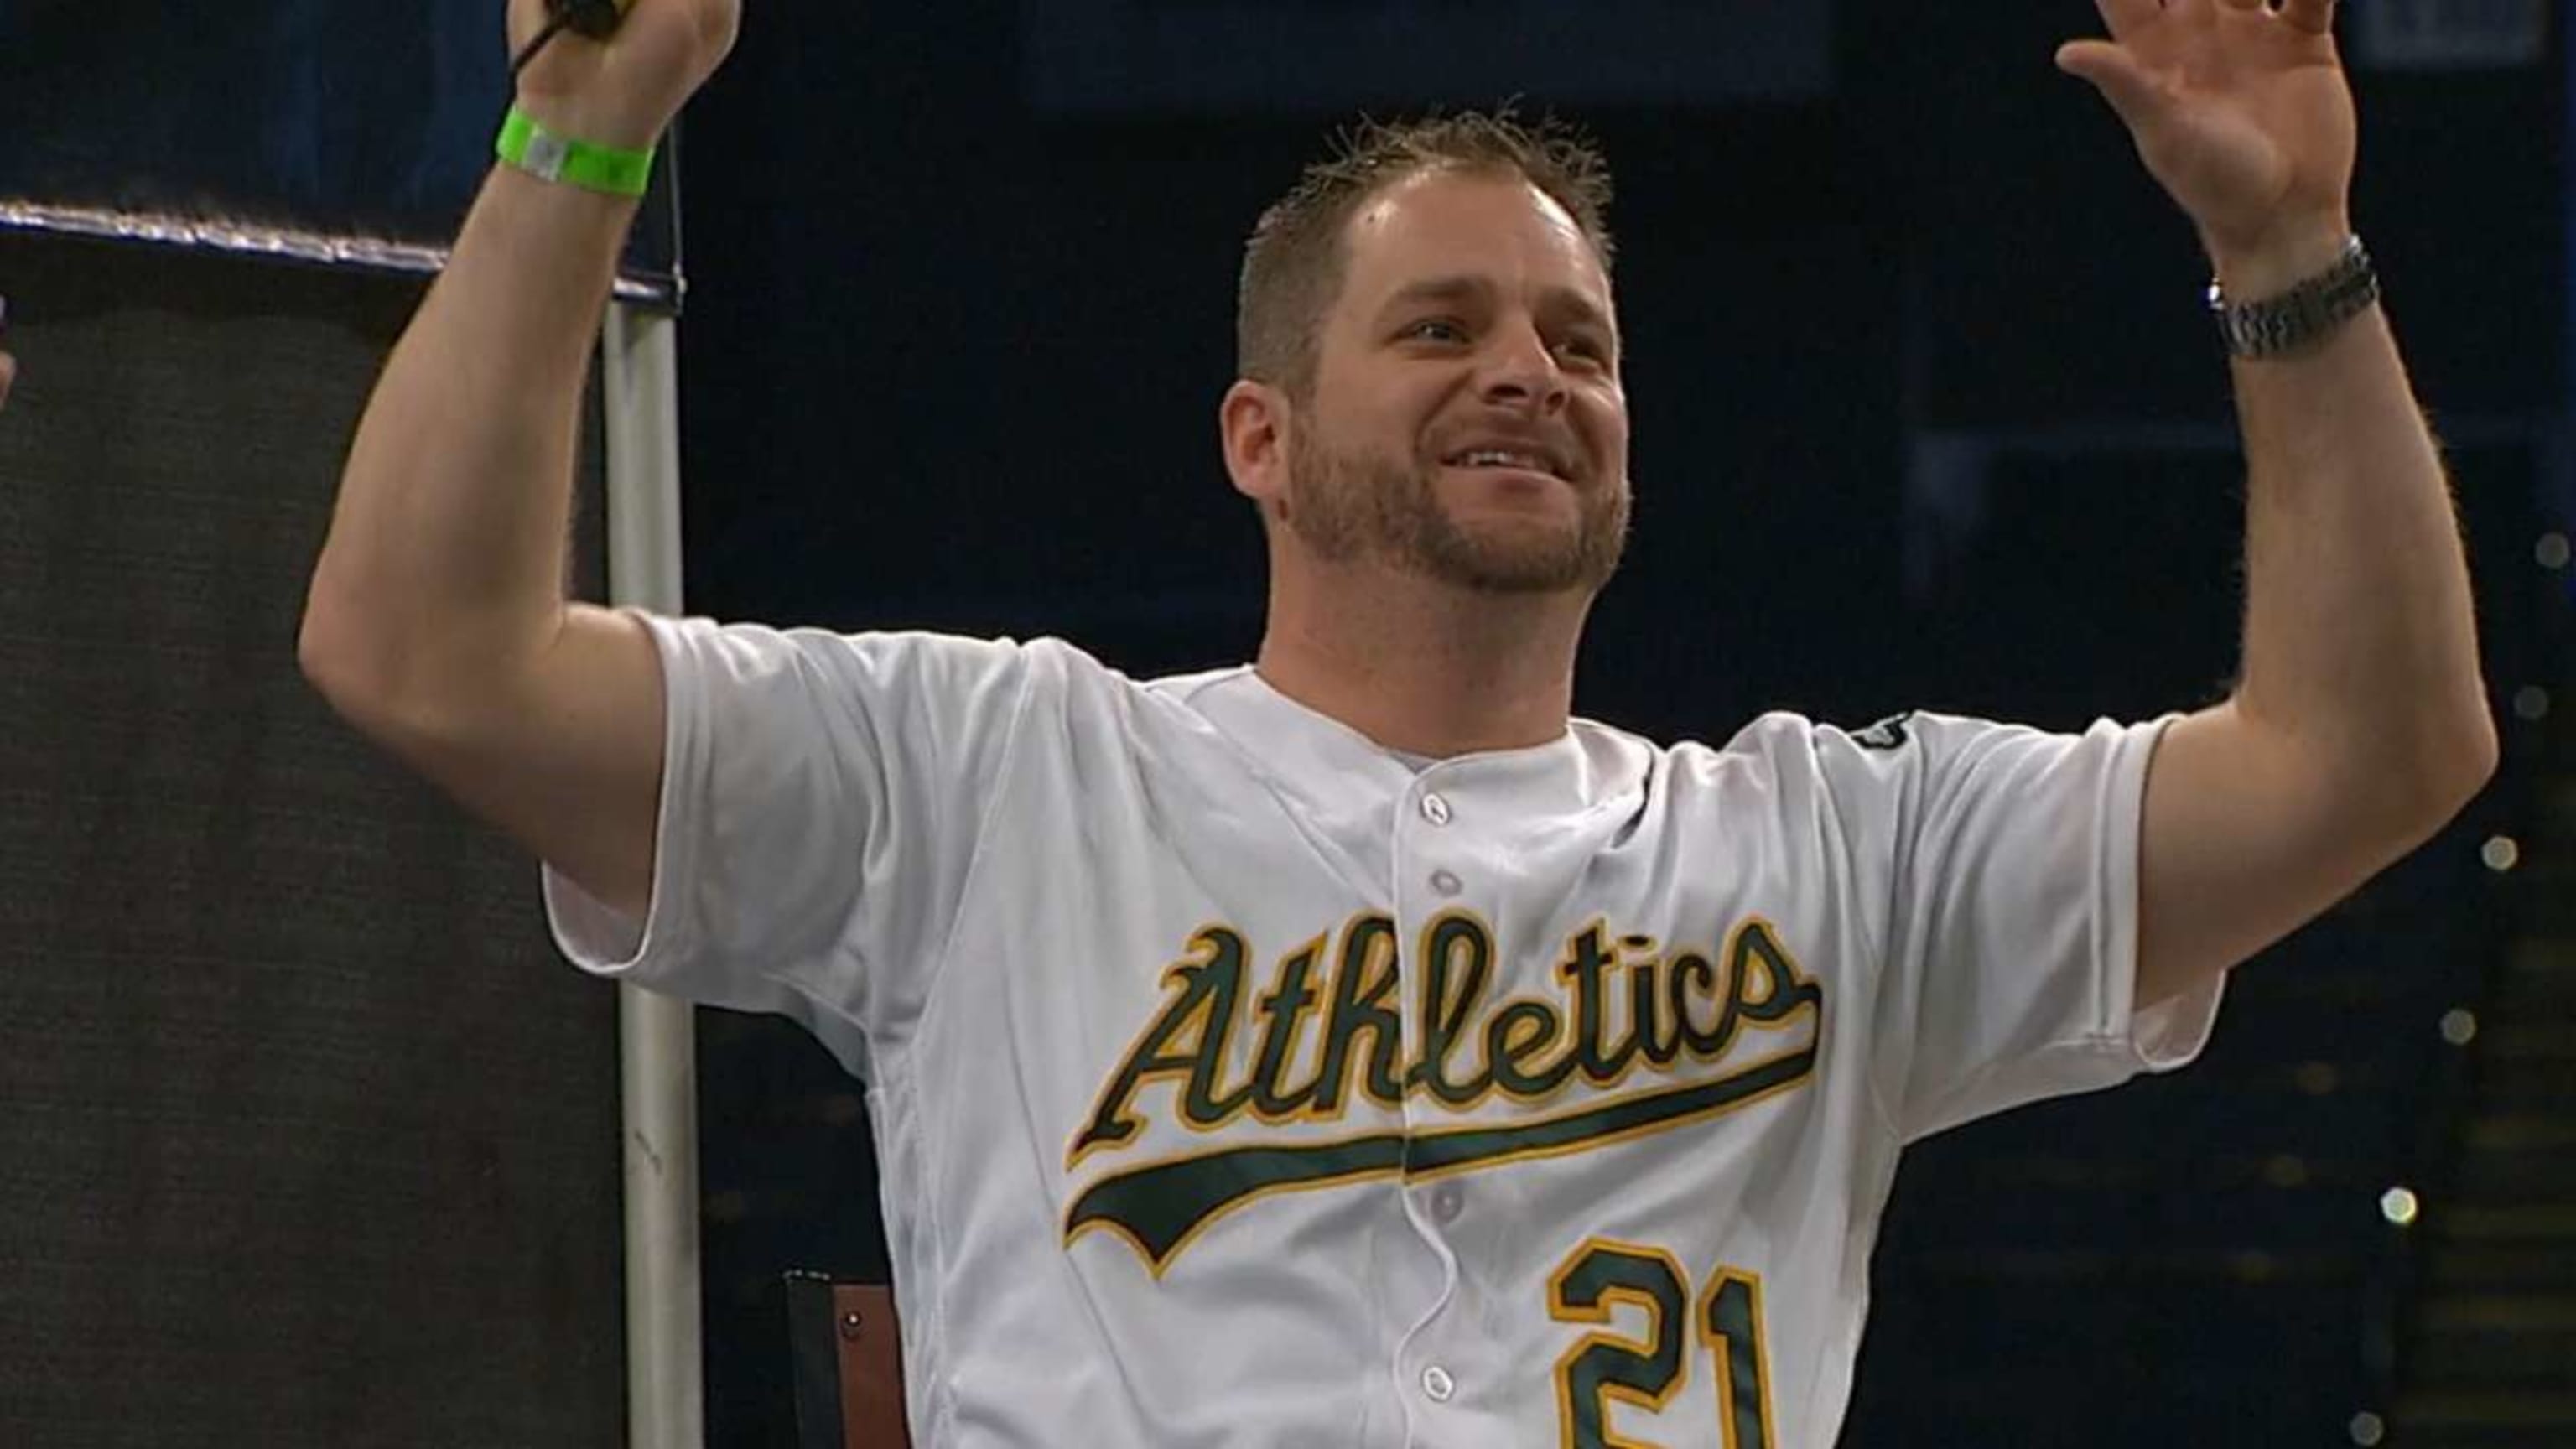 Two-time Athletics All-Star Stephen Vogt to hang up the cleats